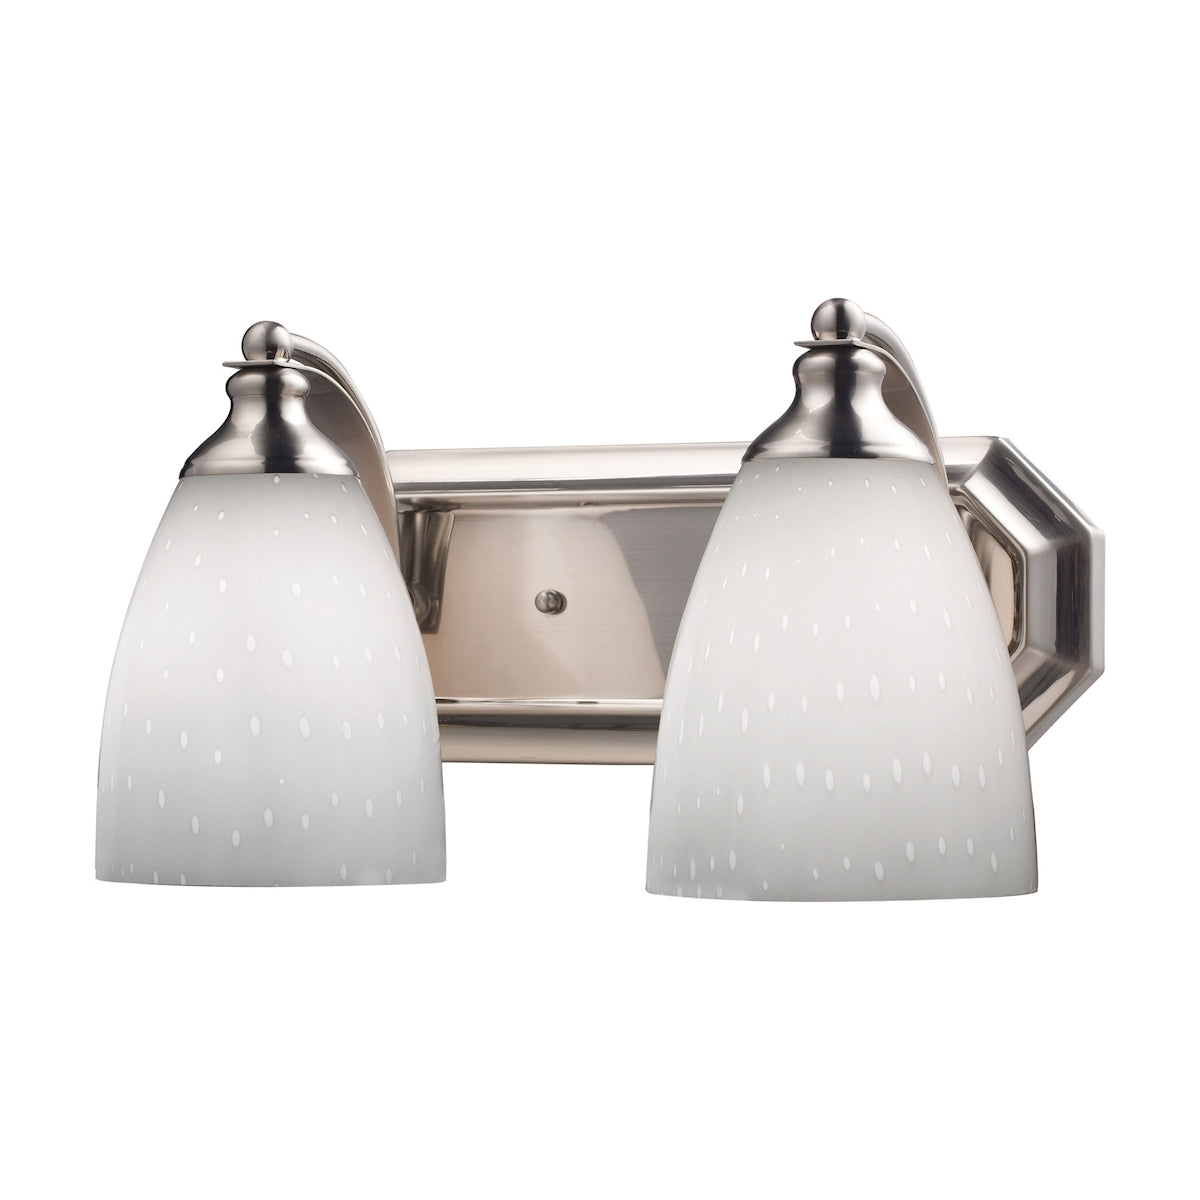 Mix-N-Match Vanity 2-Light Wall Lamp in Satin Nickel with Simple White Glass